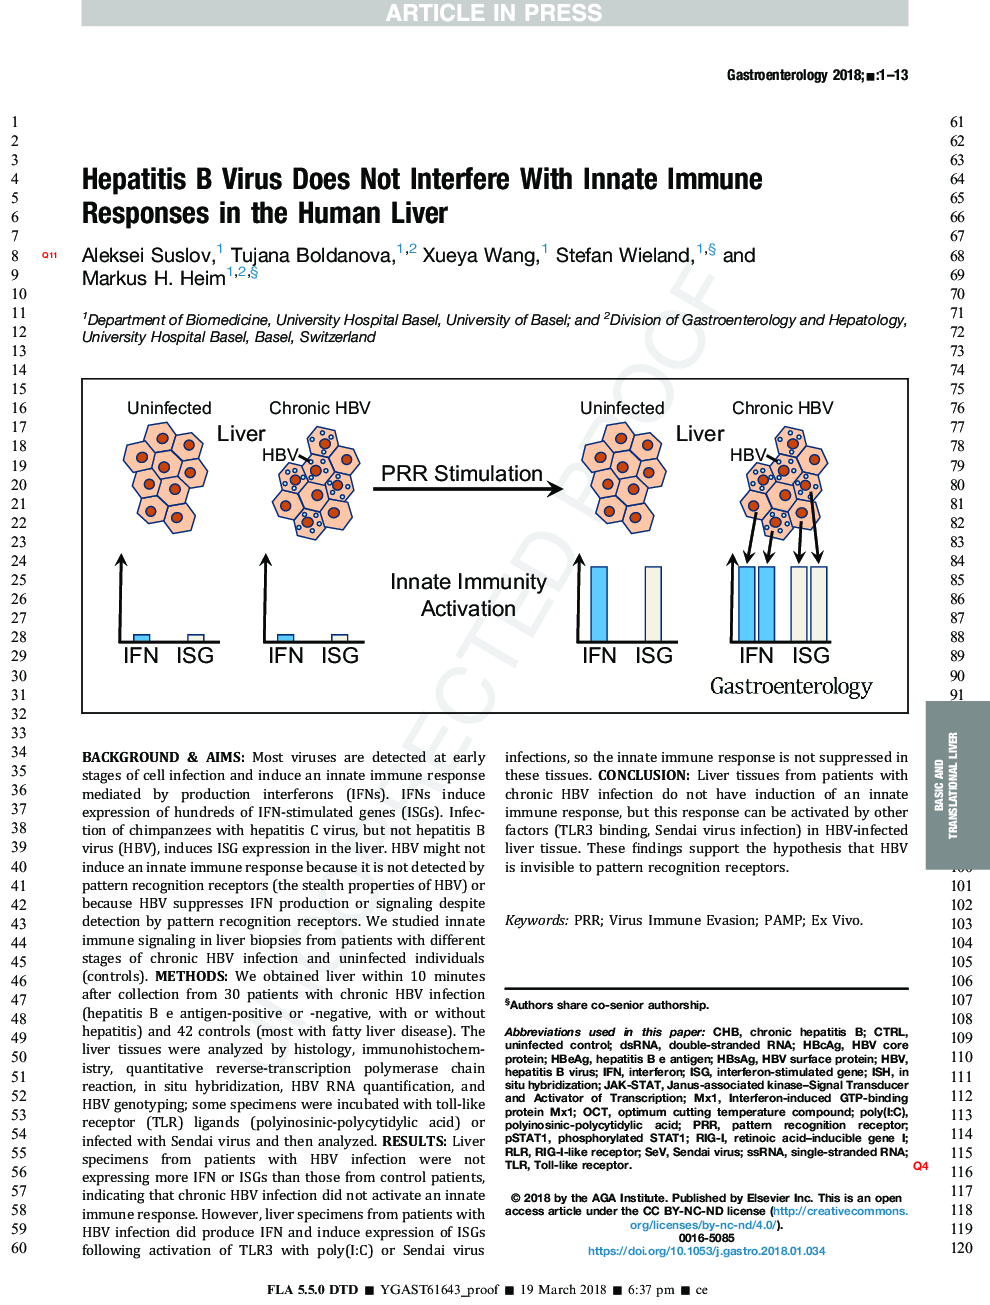 Hepatitis B Virus Does Not Interfere With Innate Immune Responses in the Human Liver